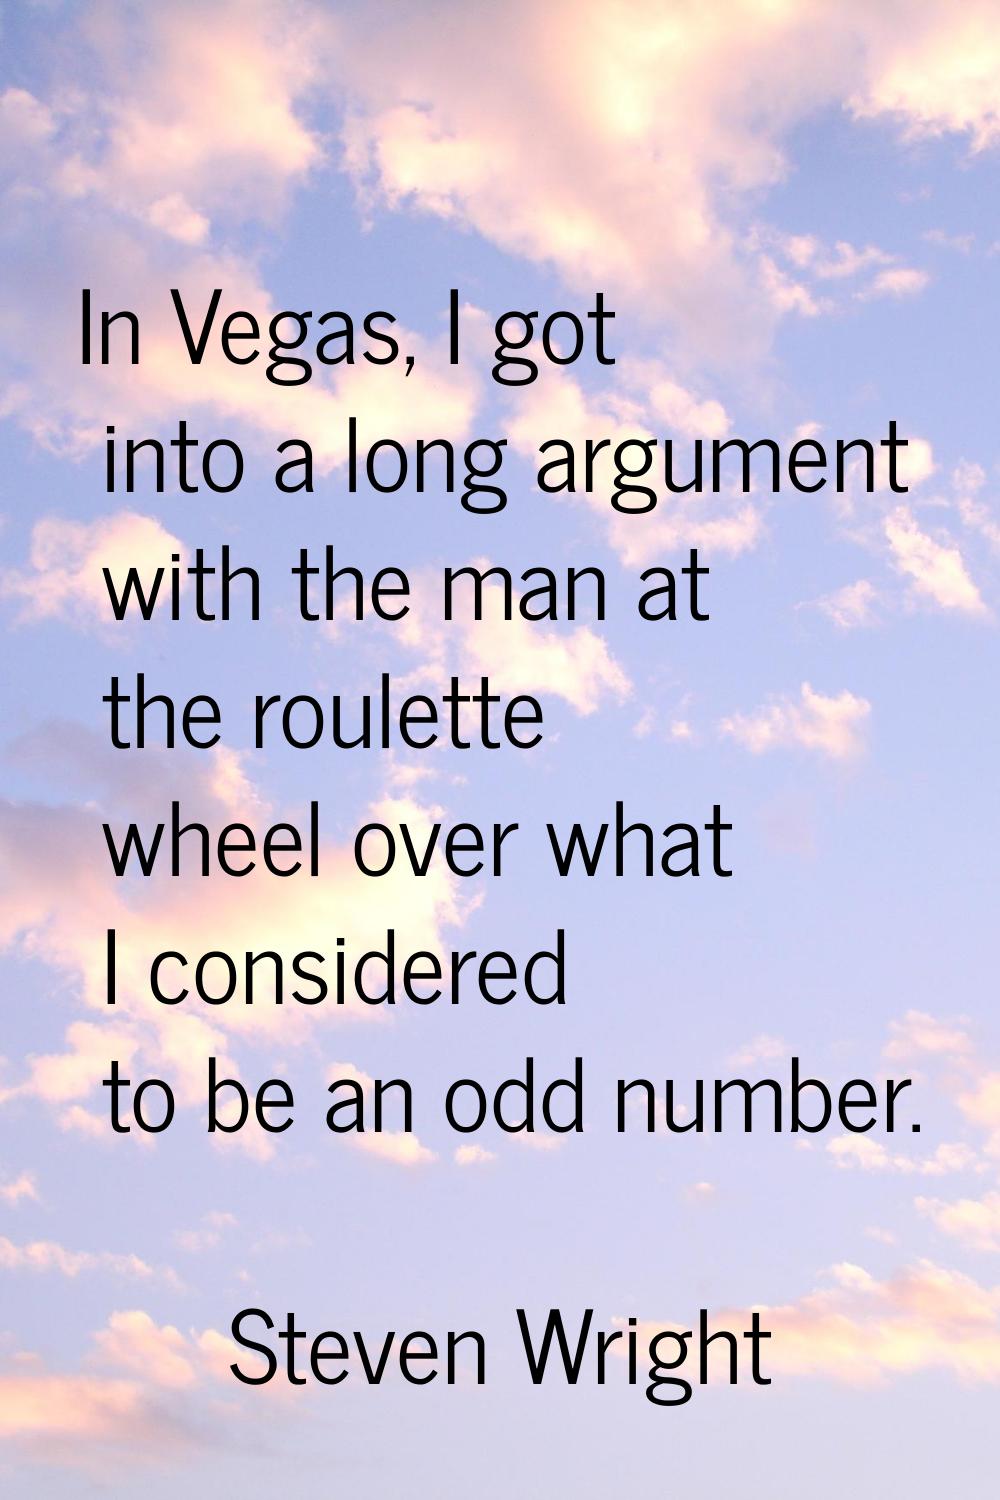 In Vegas, I got into a long argument with the man at the roulette wheel over what I considered to b